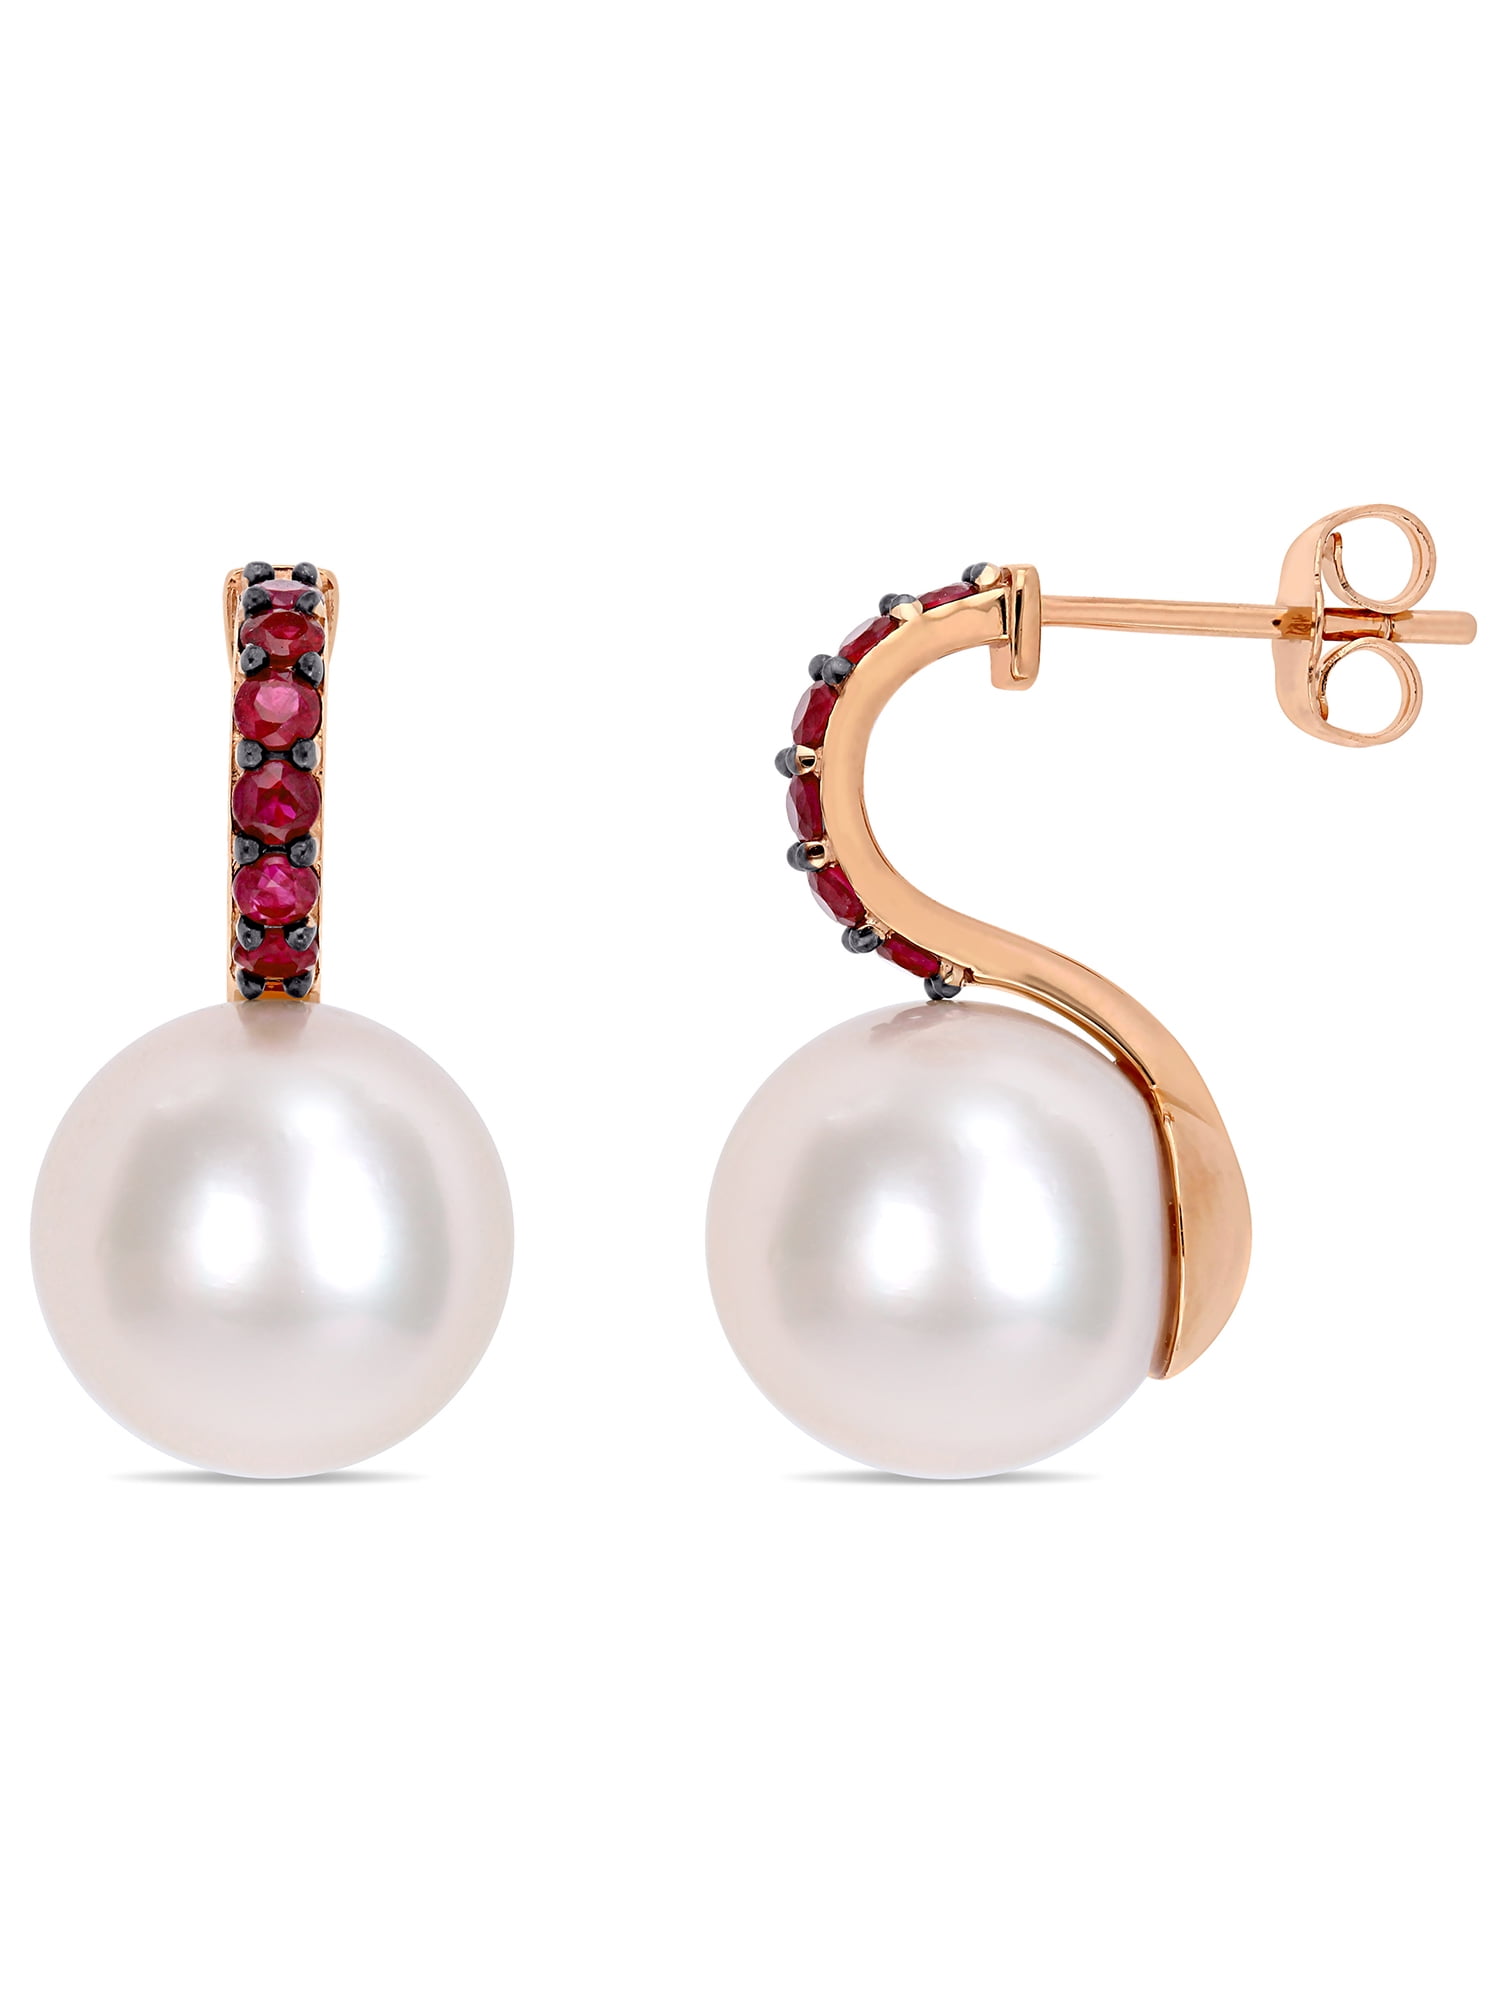 Round Red Ruby 2mm White Baroque Pearl Gold Plate 925 Sterling Silver Earrings 